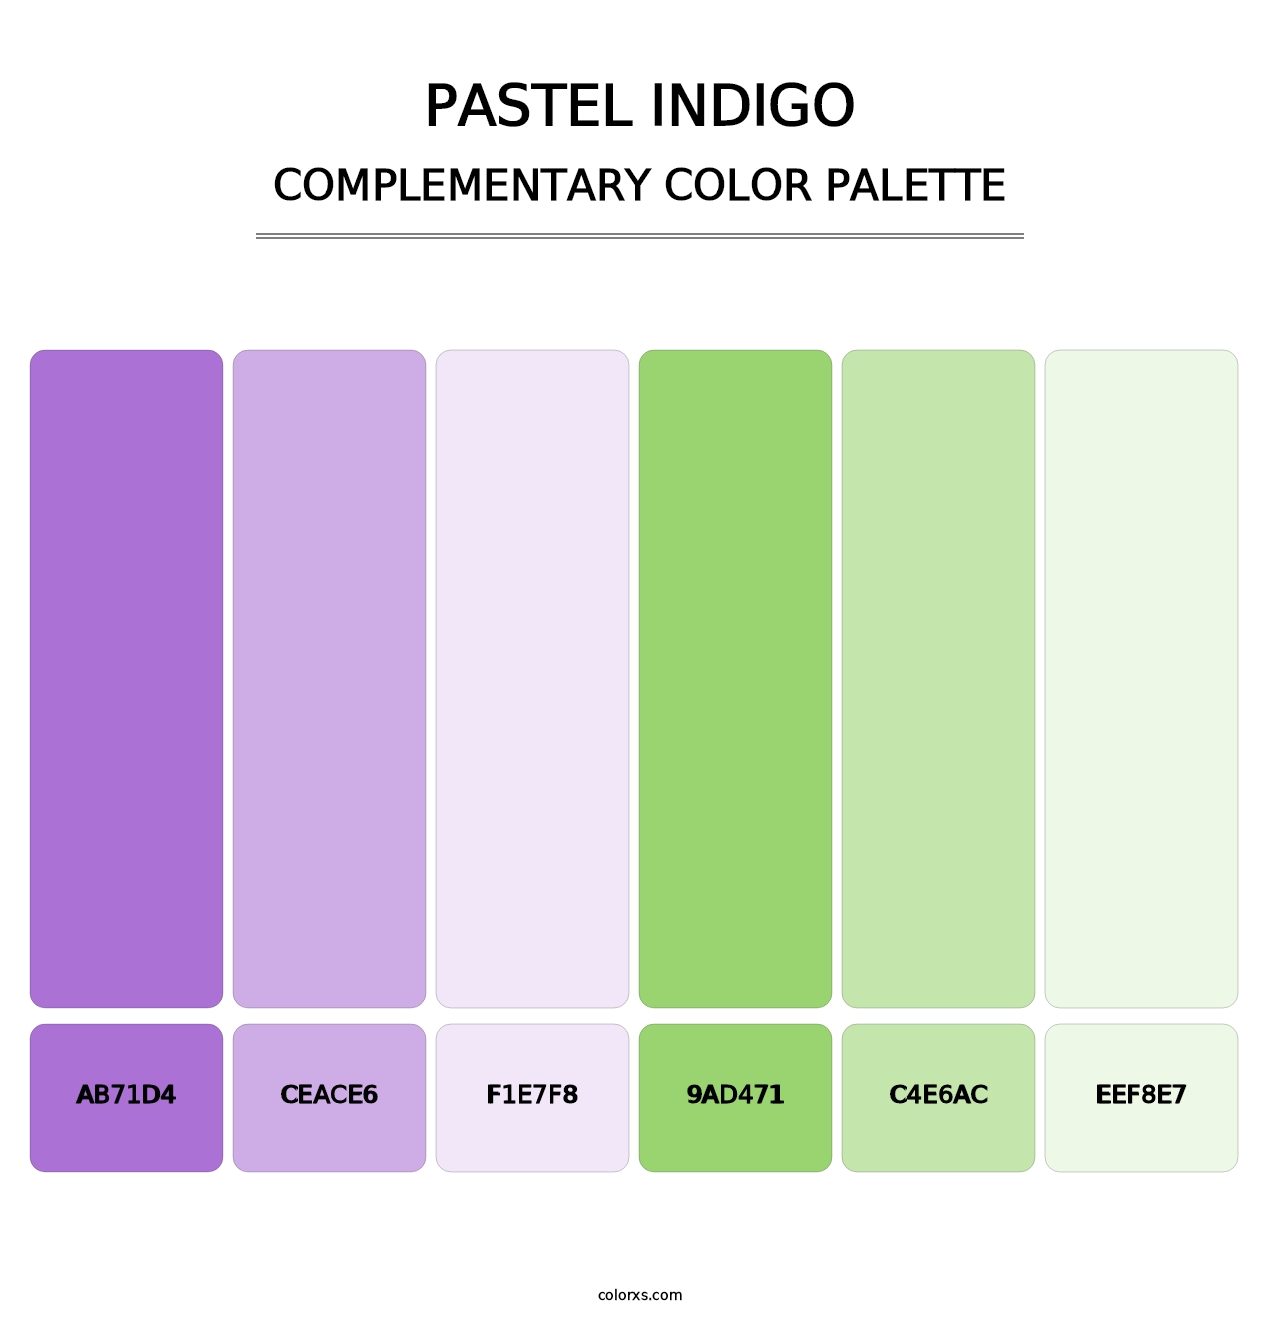 Pastel Indigo - Complementary Color Palette